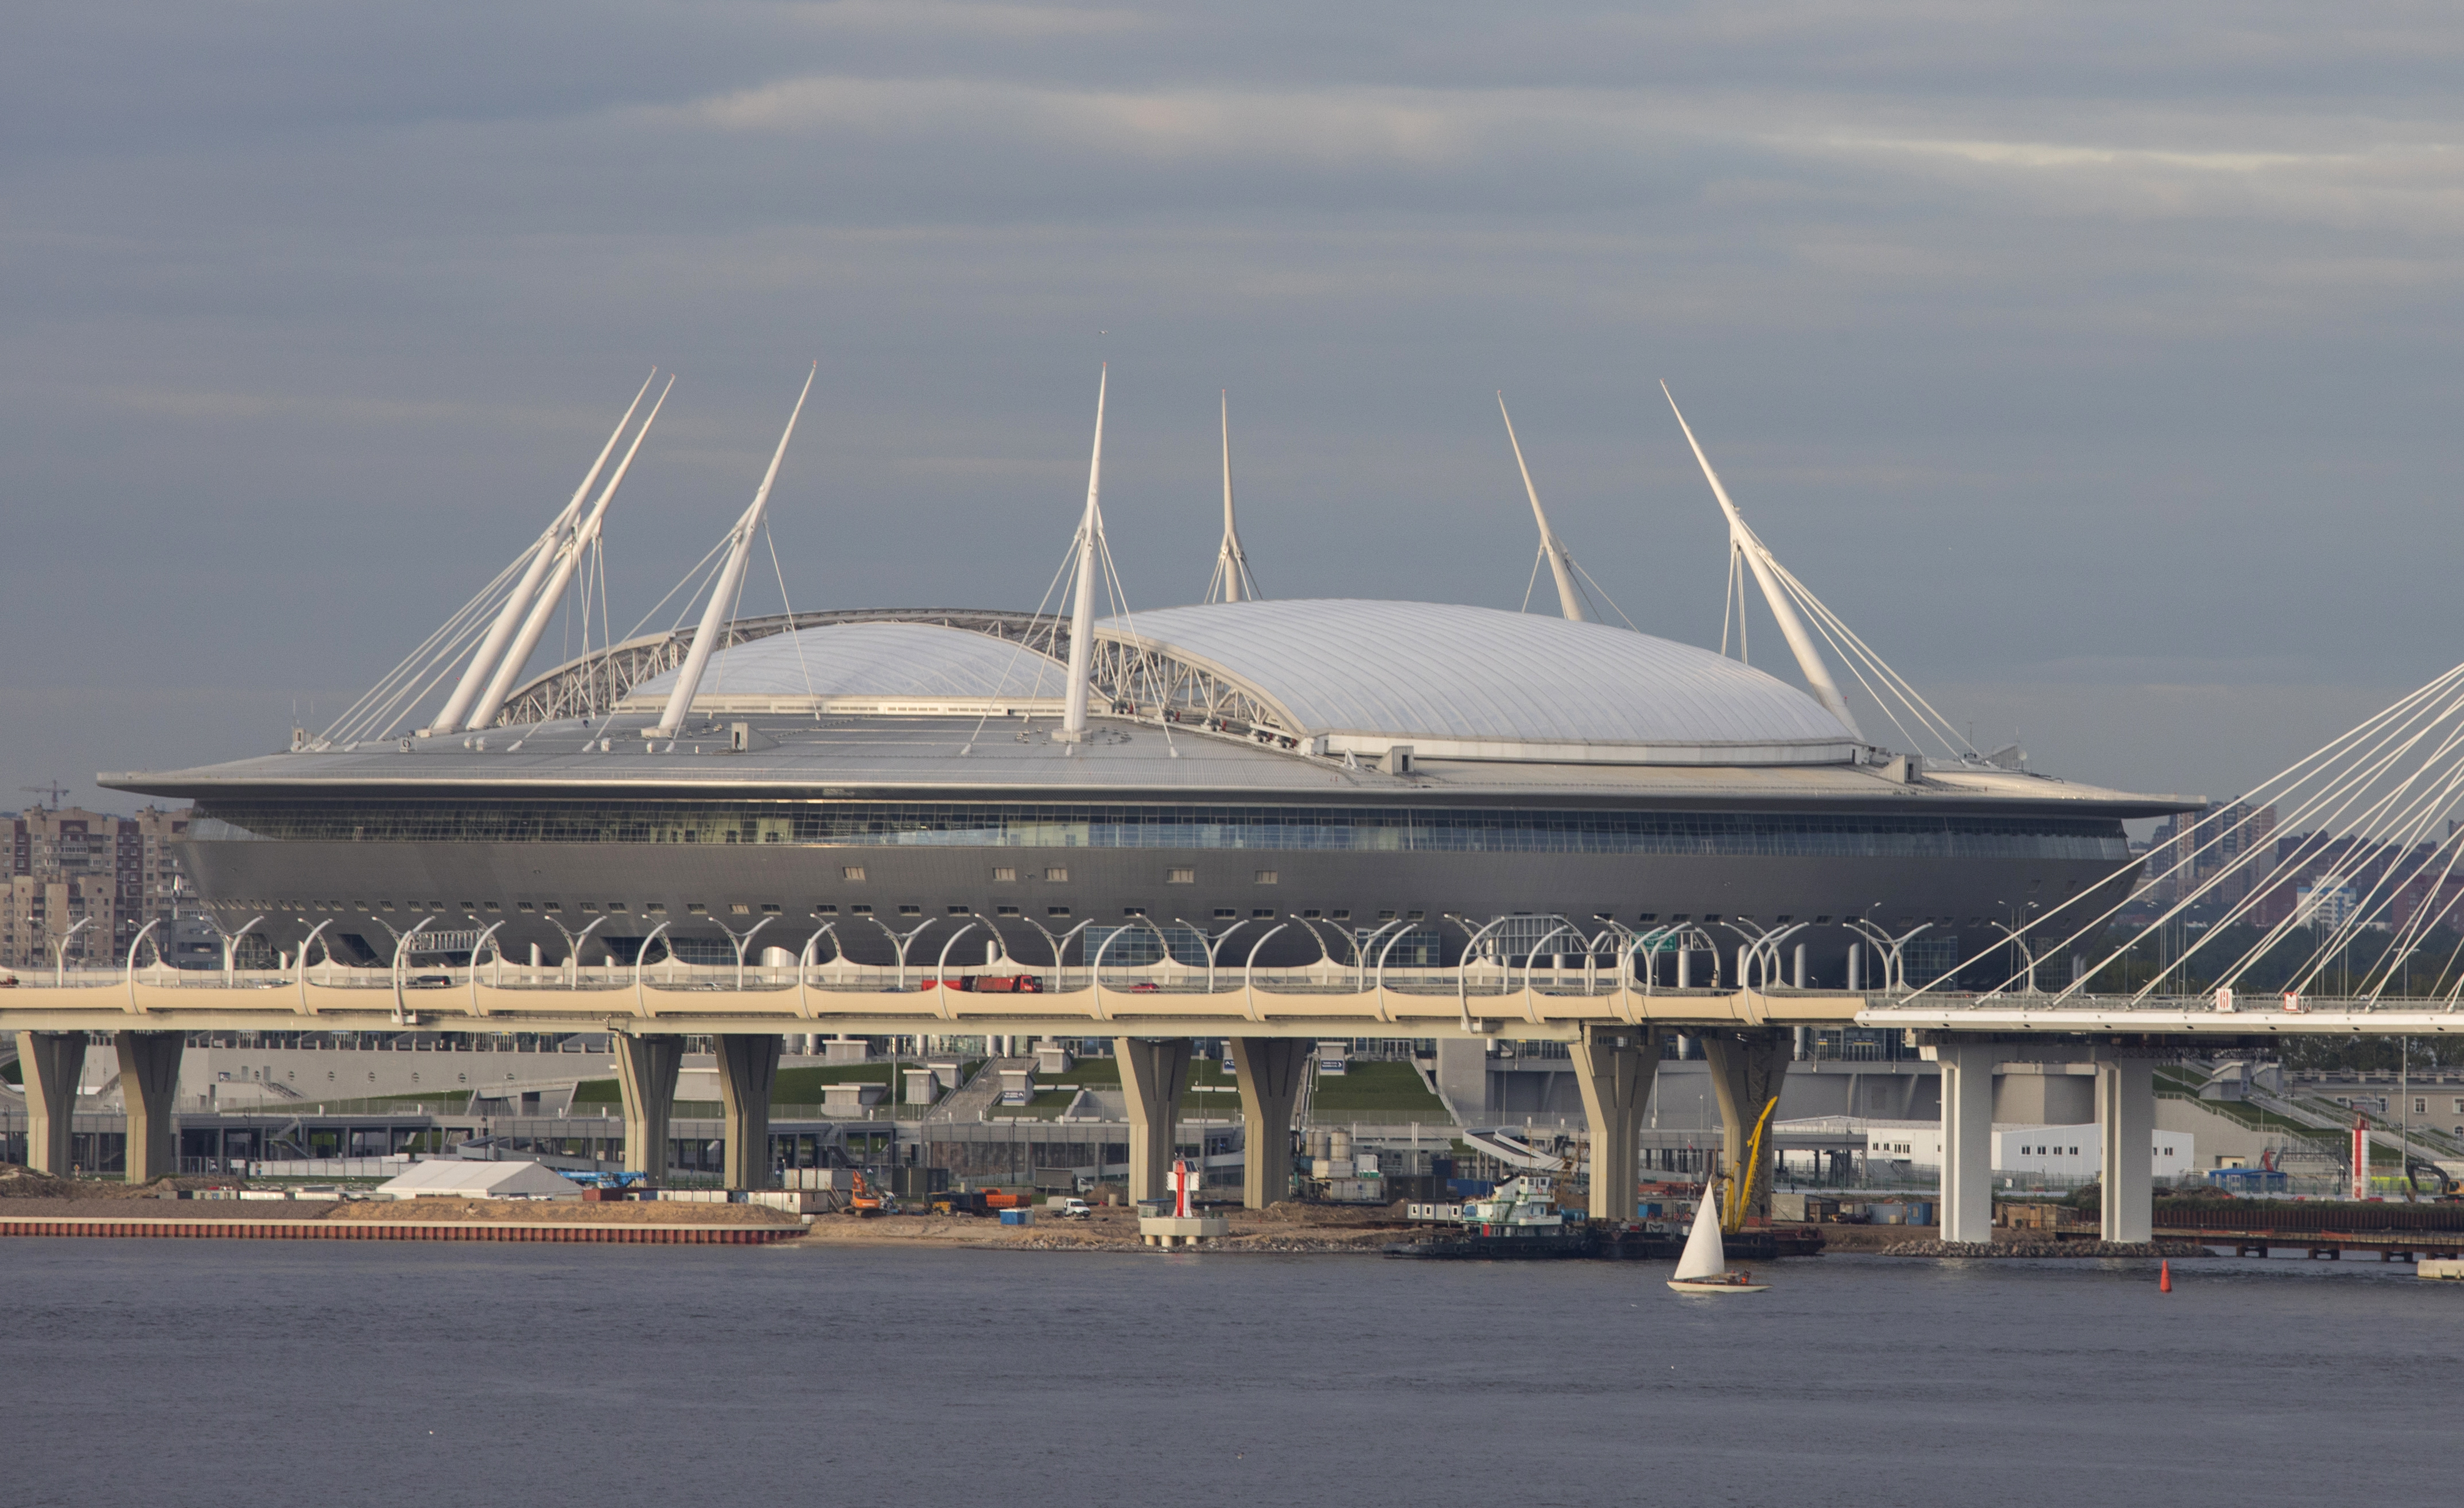 The Krestovsky Stadium is viewed looking from the Gulf of Finland in St. Petersburg, Russia, on Aug. 28, 2017. The soccer stadium has a retractable roof and is in the western part of Krestosky Island in St. Petersburg near the Gulf of Finland. The stadium will be know as Saint Petersburg Stadium during the 2018 FIFA World Cup. The stadium is near the new Gazprom headquarters. (AP Photo/Jon Elswick)